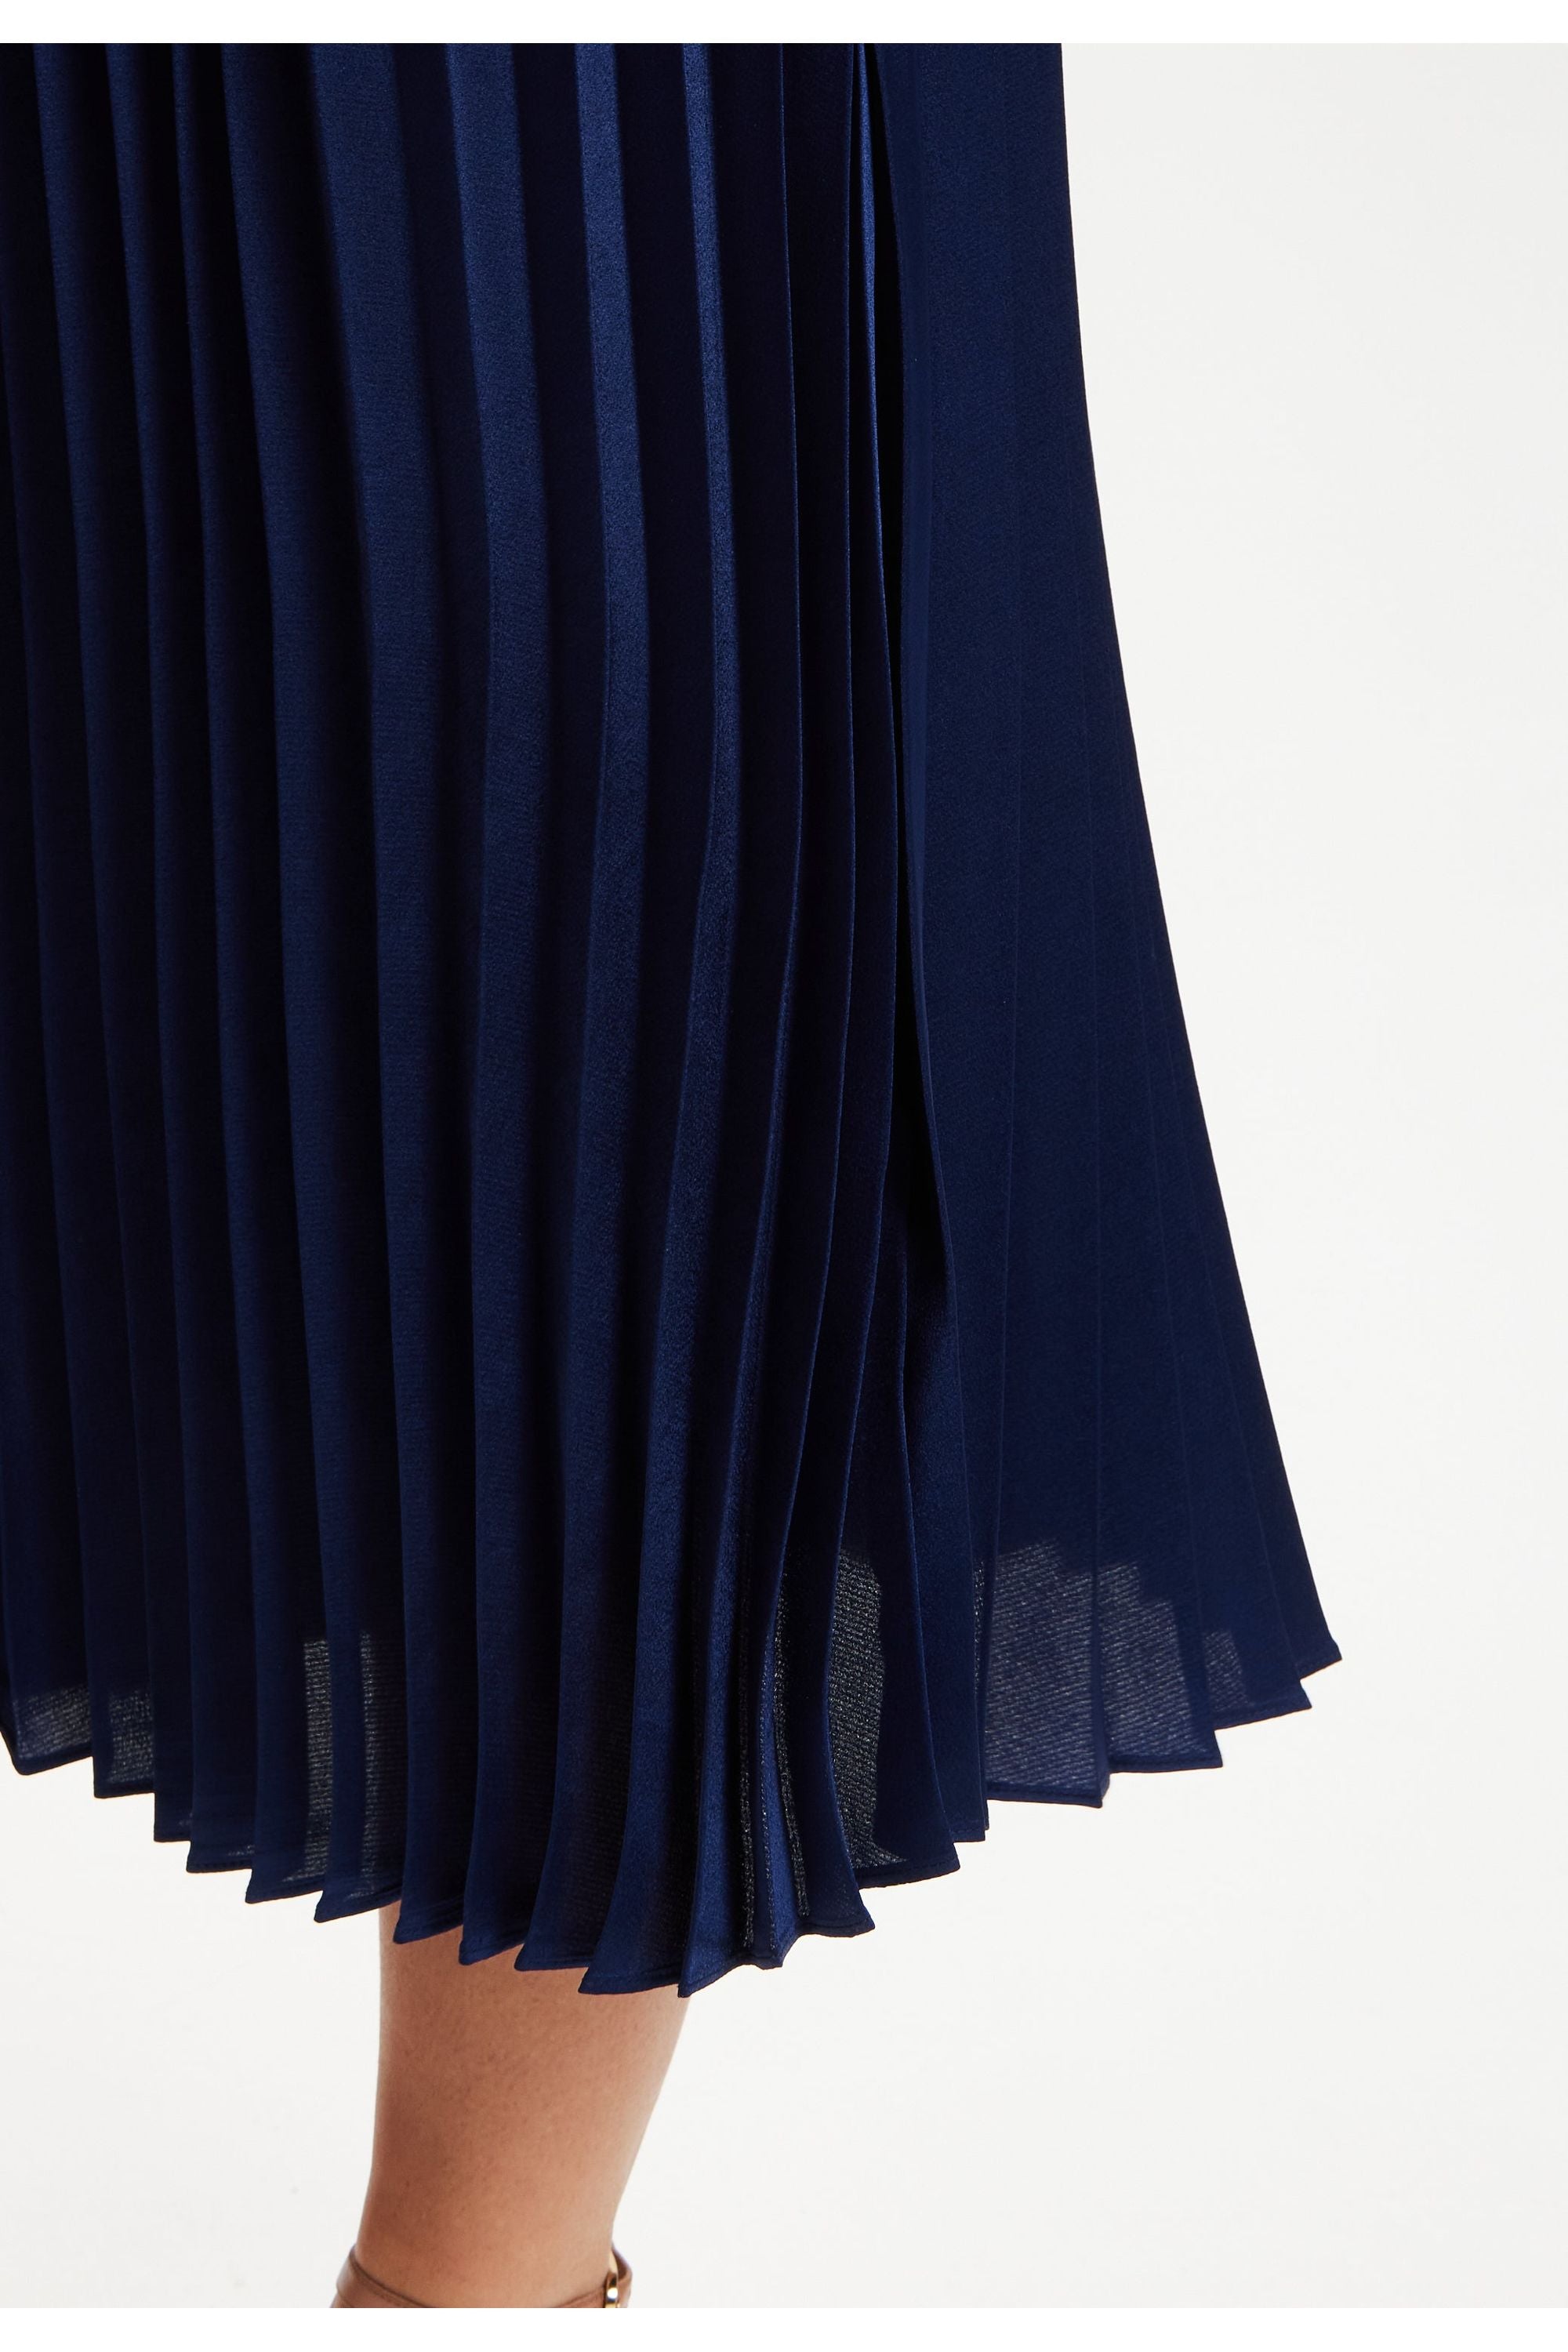 Navy Midi Dress With Pleat Details EH1908Navy